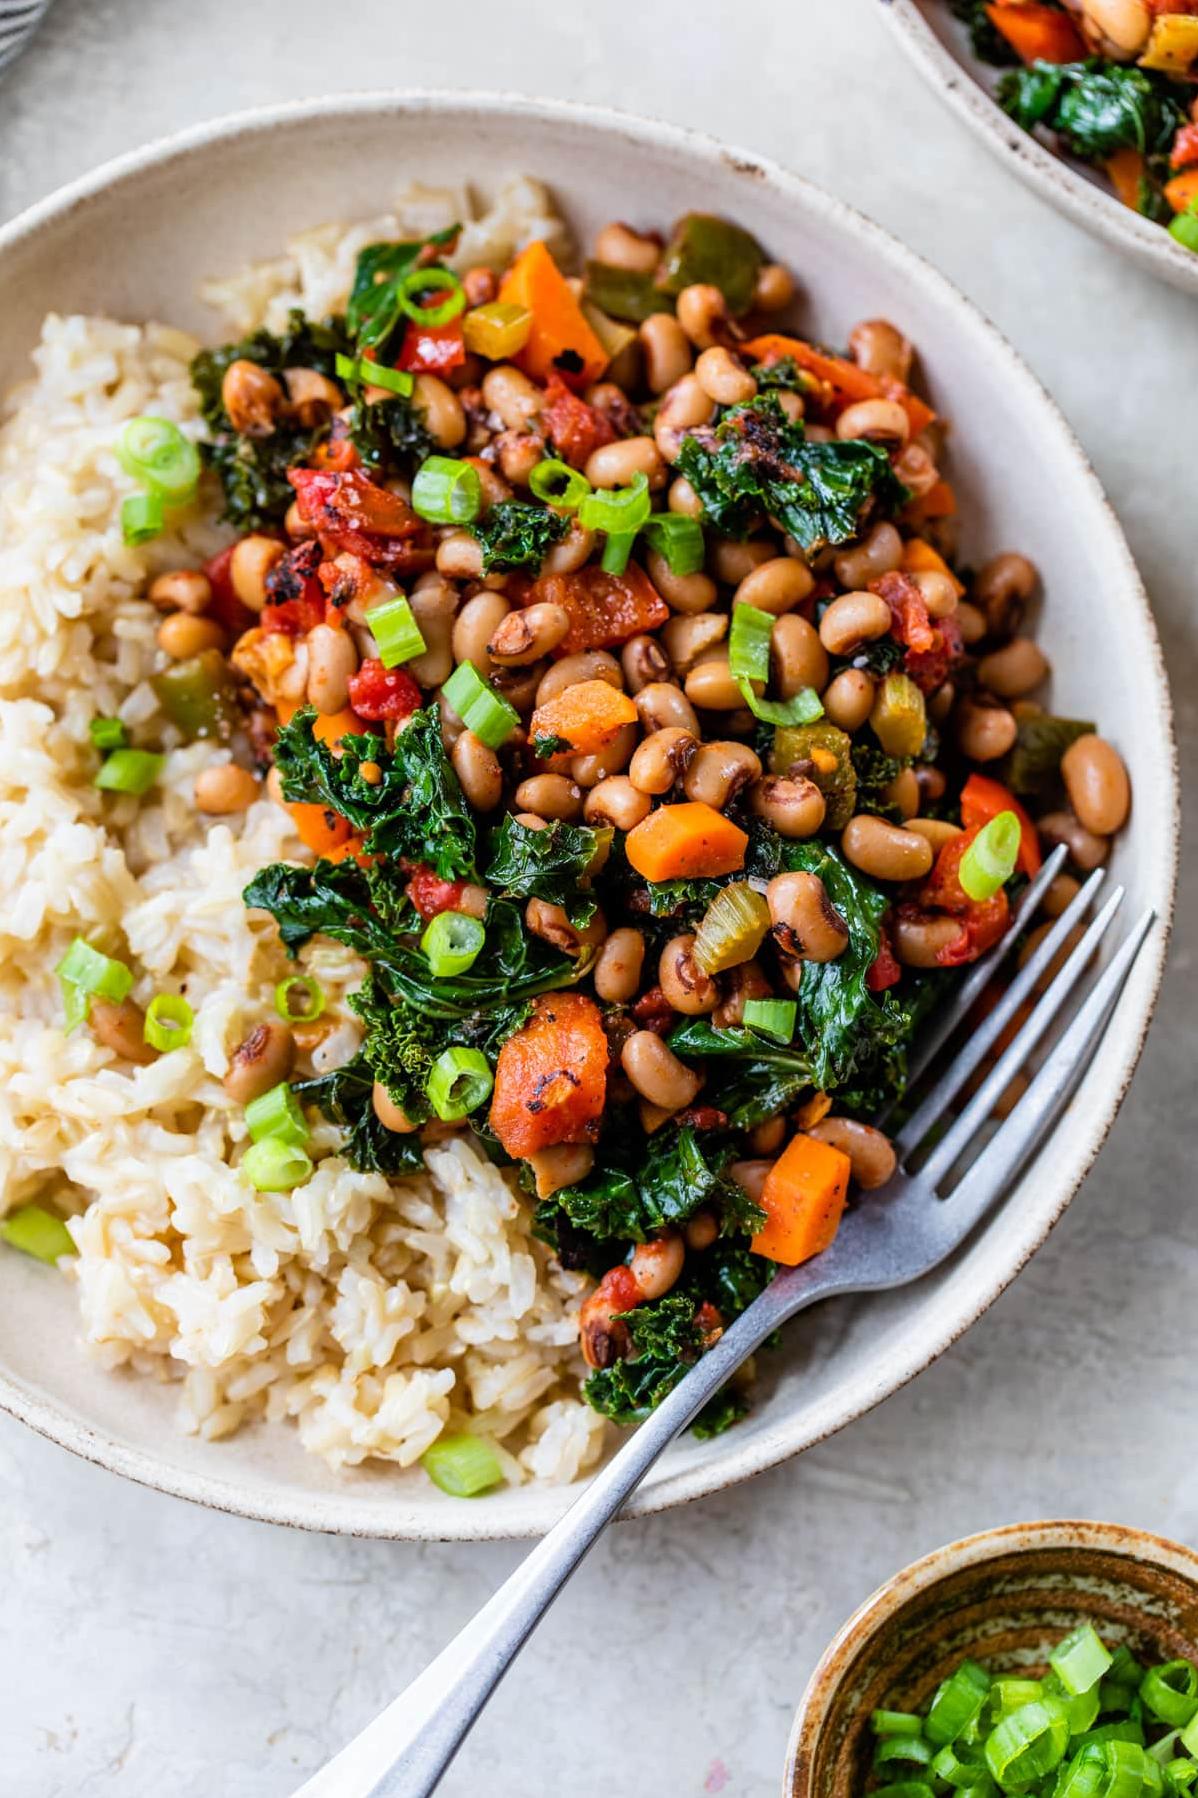  A hearty vegetarian meal that's quick and easy to make